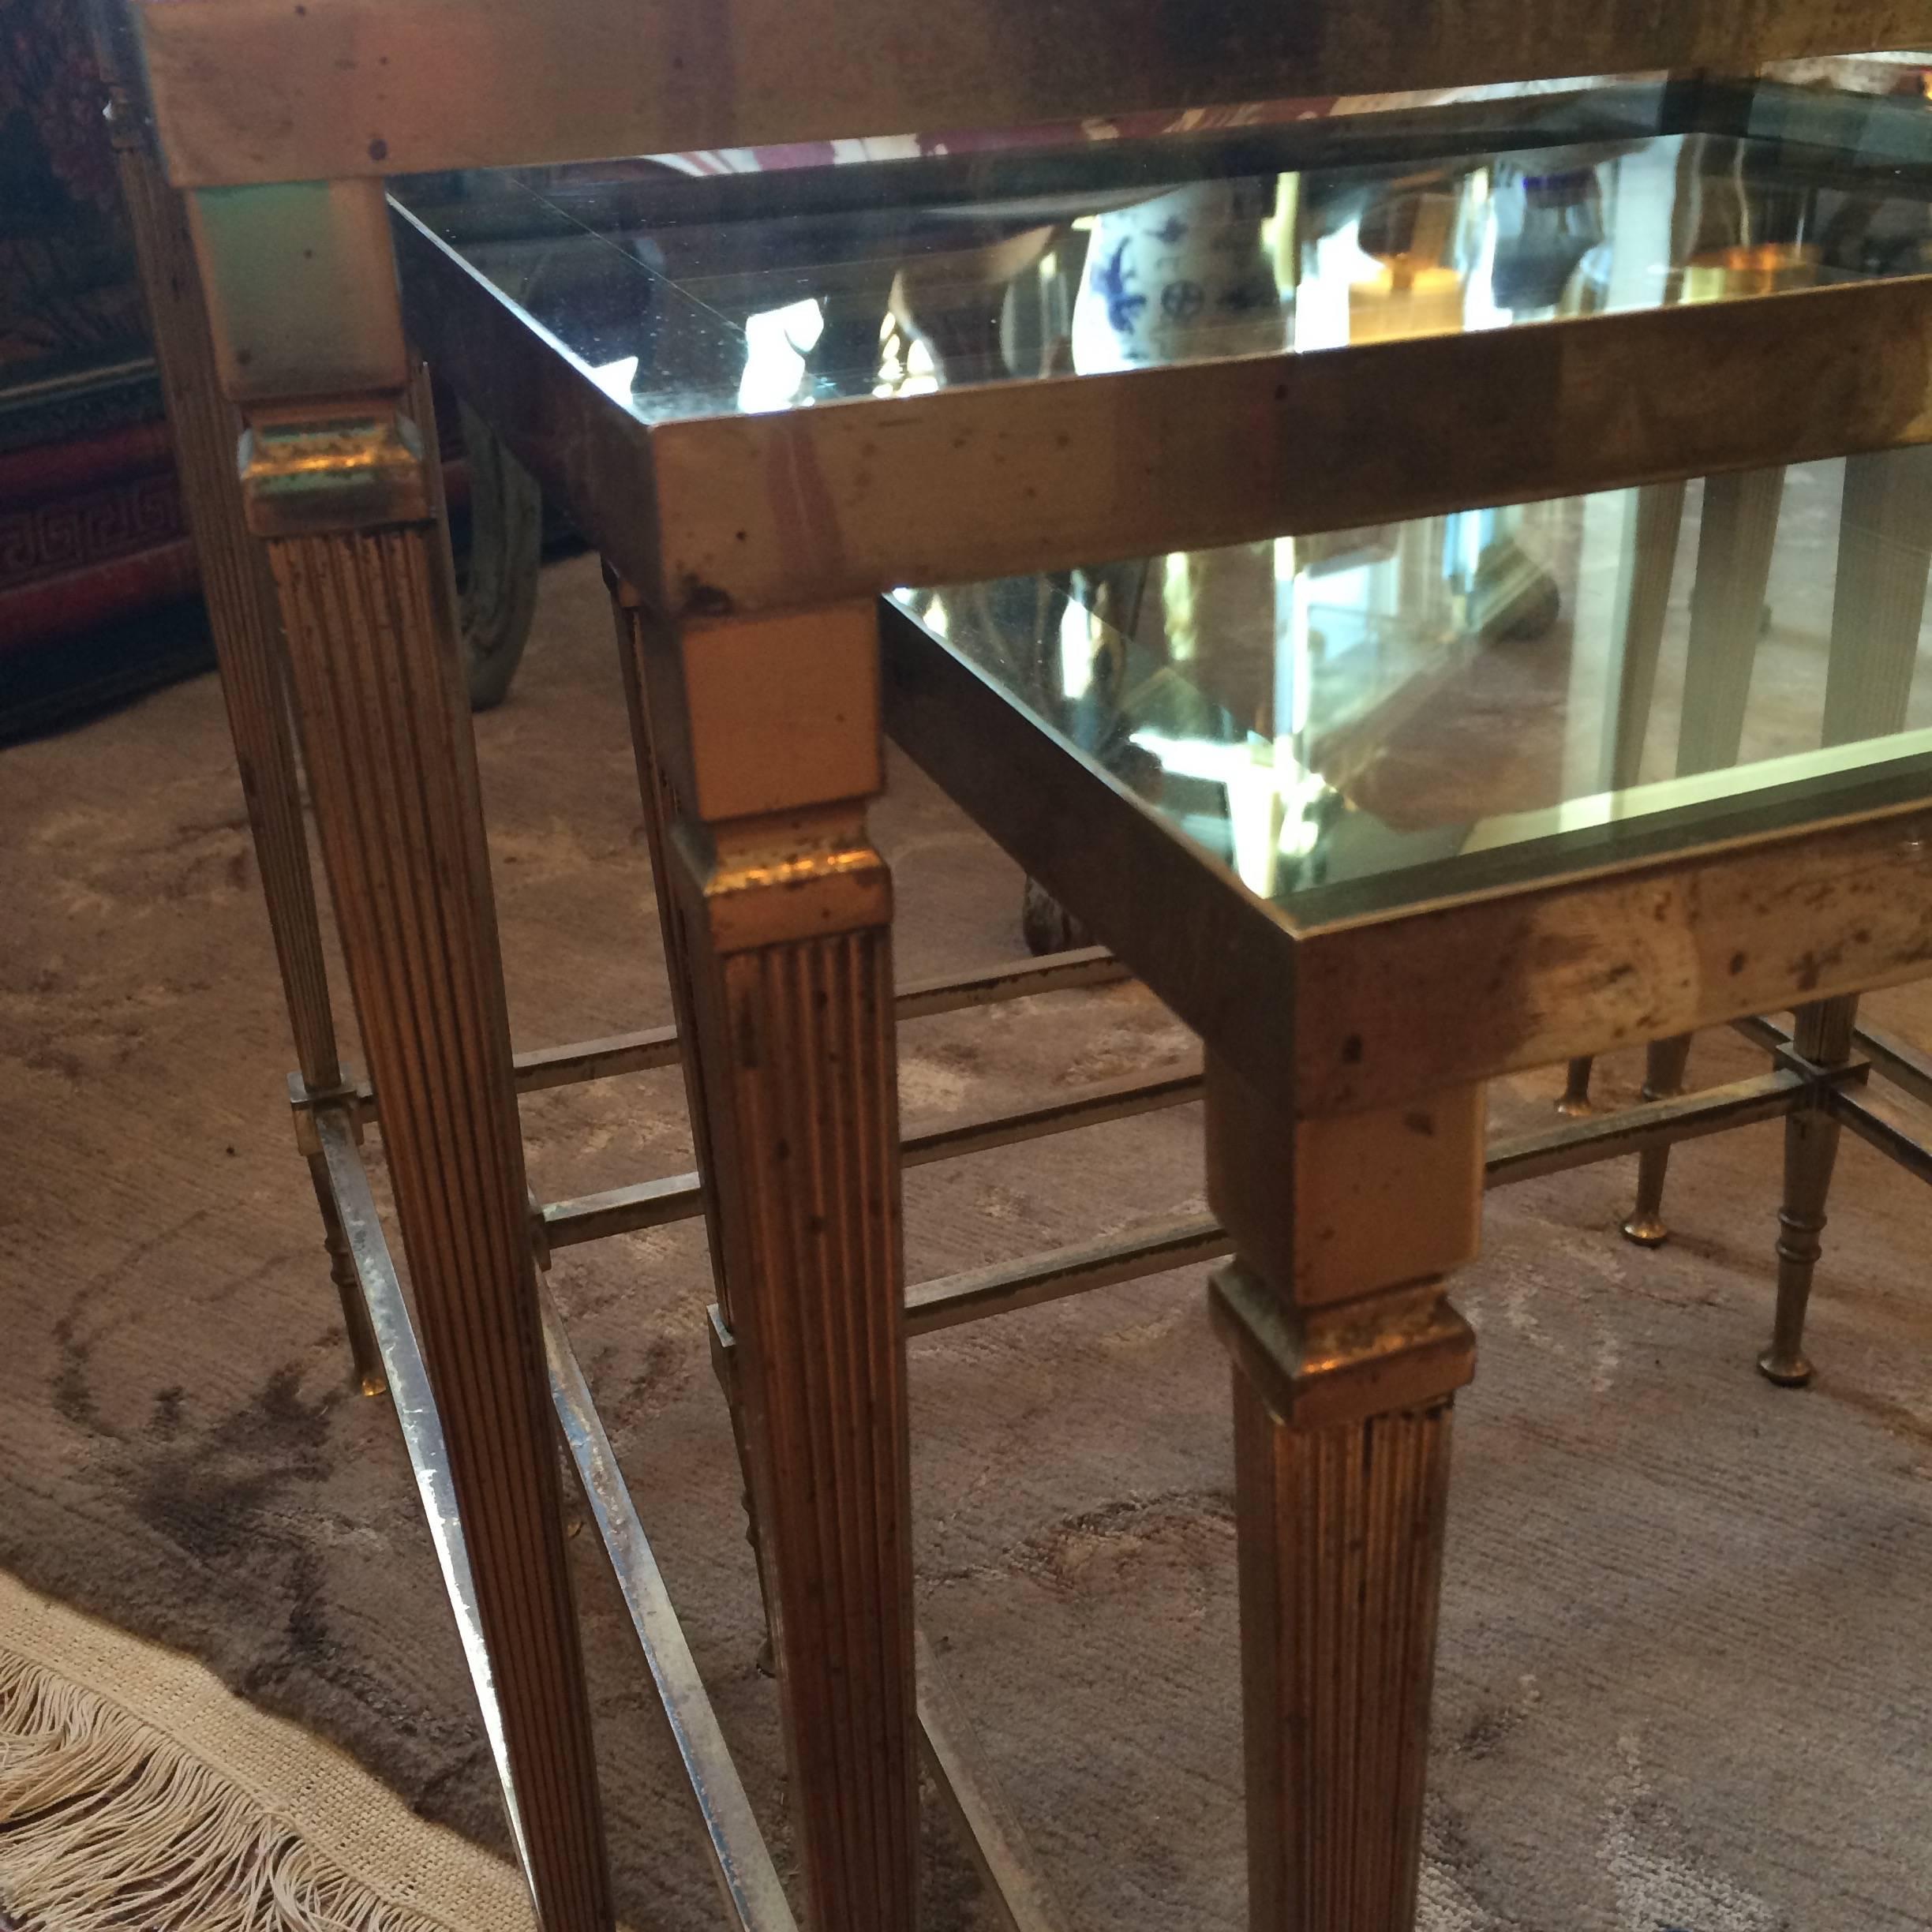 Three brass nesting tables with glass inset tops. Glass has silver mirrored edge detail. Fluted tapered legs with a neoclassical feel.